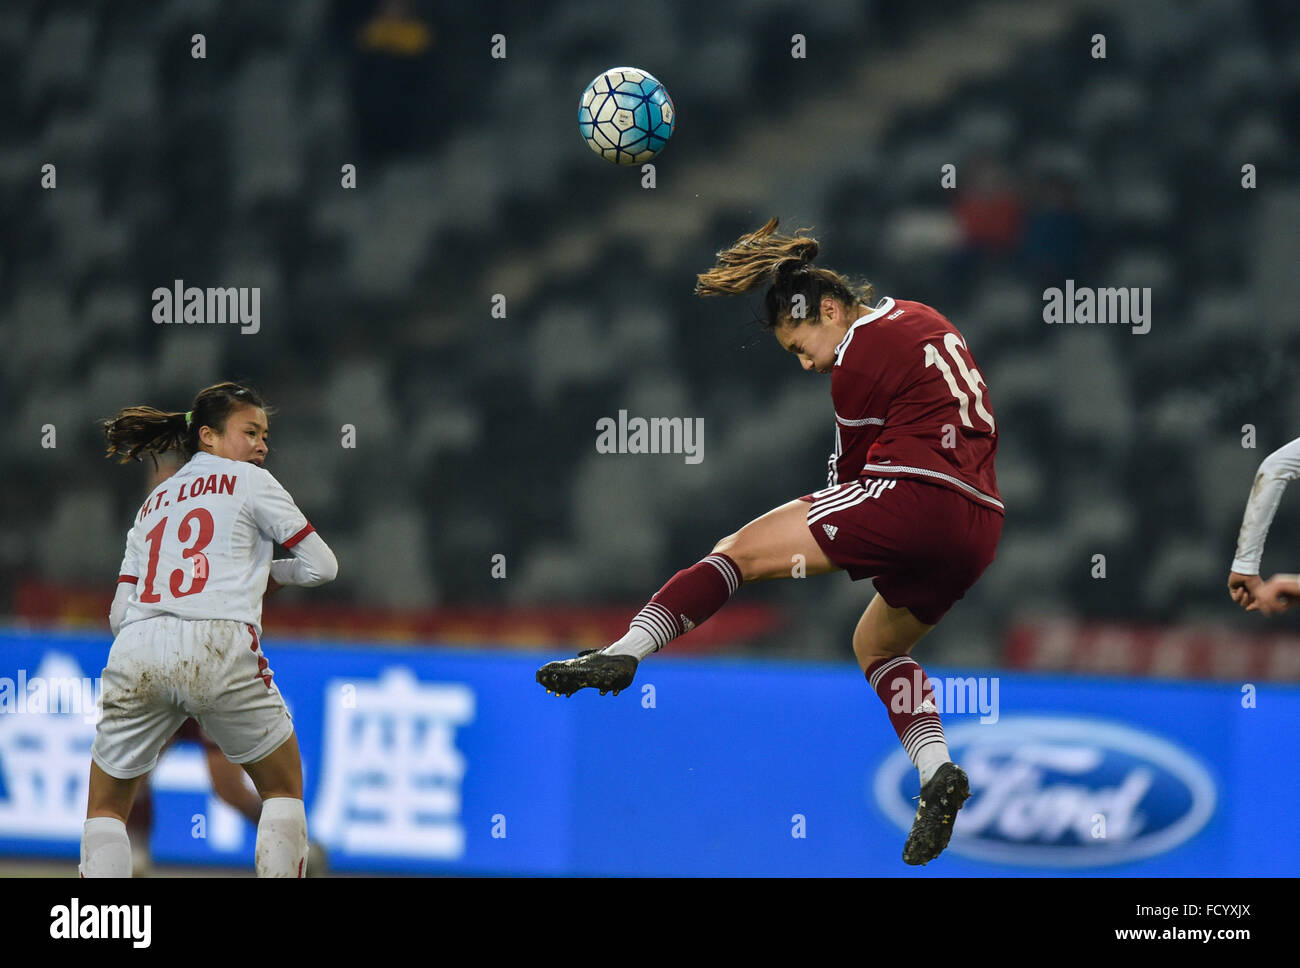 Shenzhen, China's Guangdong Province. 26th Jan, 2016. Desiree Monsivais (R) of Mexico heads the ball during the match against Vietnam at the 2016 Shenzhen Women's Football International Tournament held in Shenzhen, south China's Guangdong Province, on Jan. 26, 2016. Mexico won 1-0. © Mao Siqian/Xinhua/Alamy Live News Stock Photo